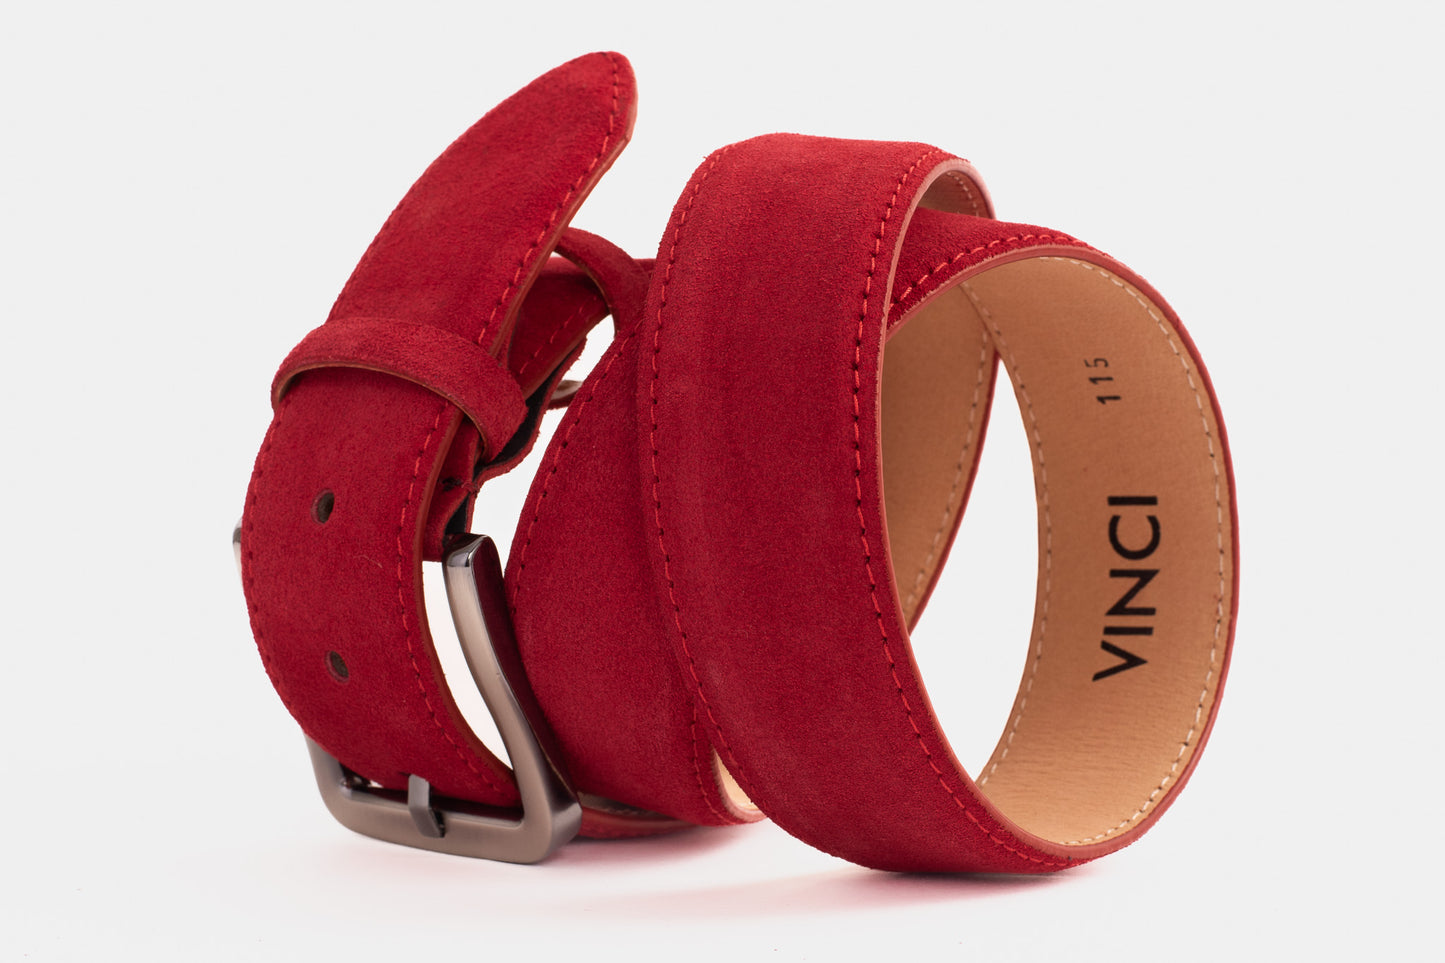 The Bari Red Suede Leather Belt